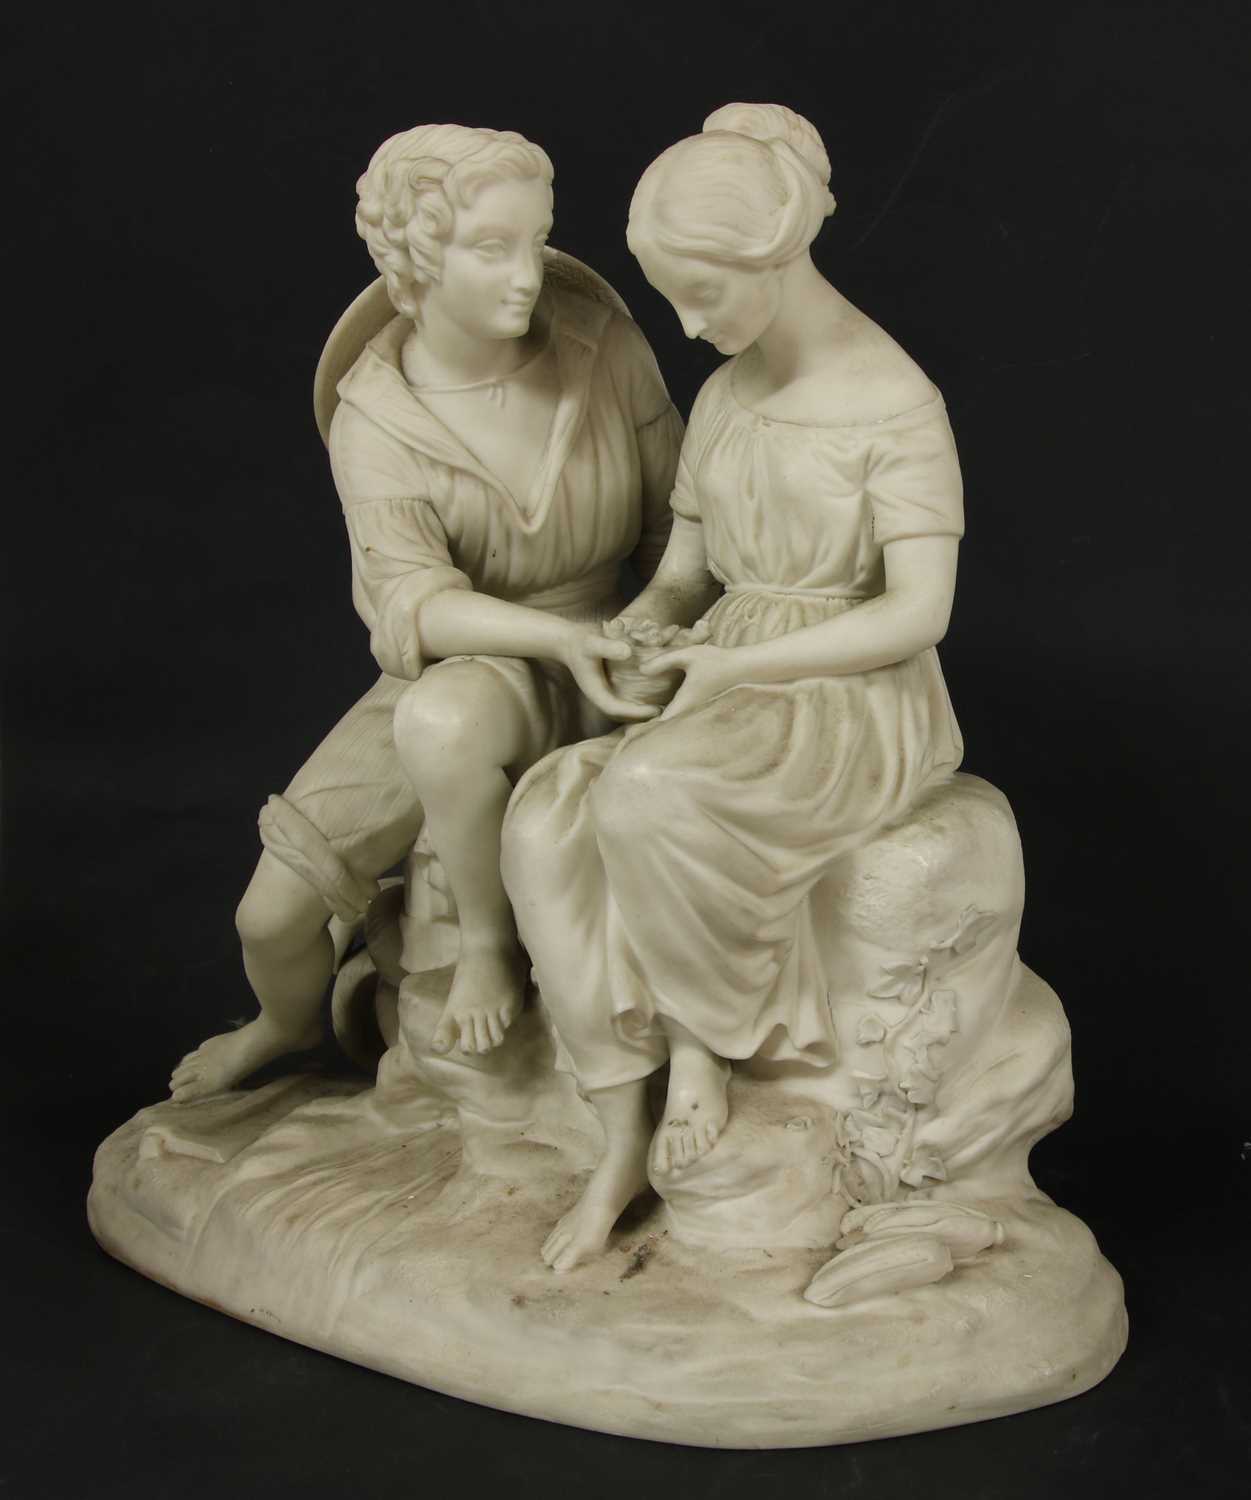 Paul and Virginia, a Copeland parian figure group modelled by Cumberworth, - Image 2 of 3